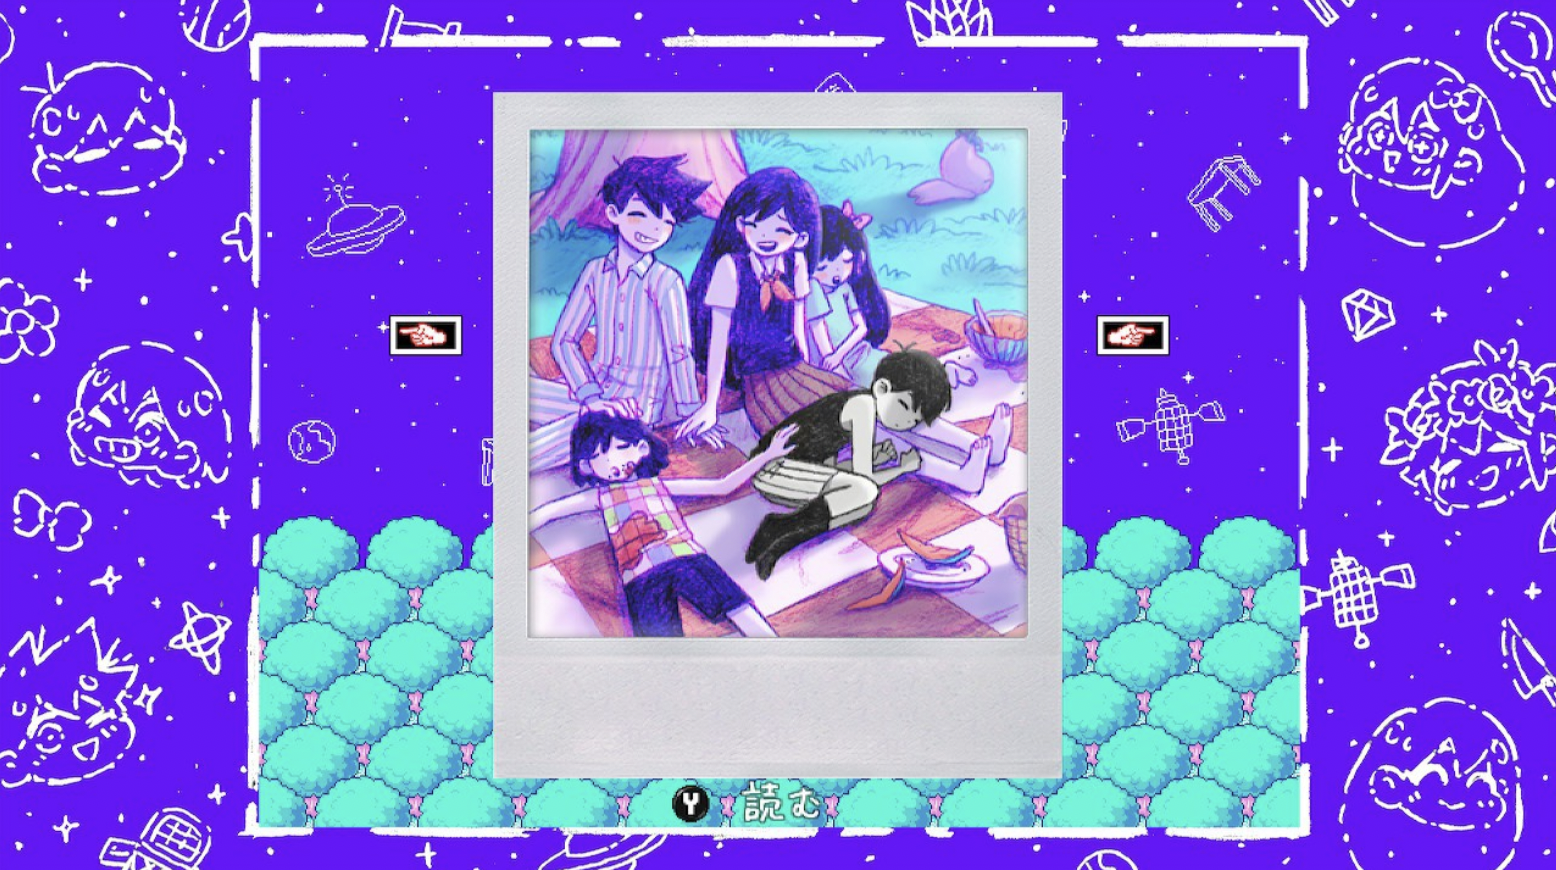 omori game download android